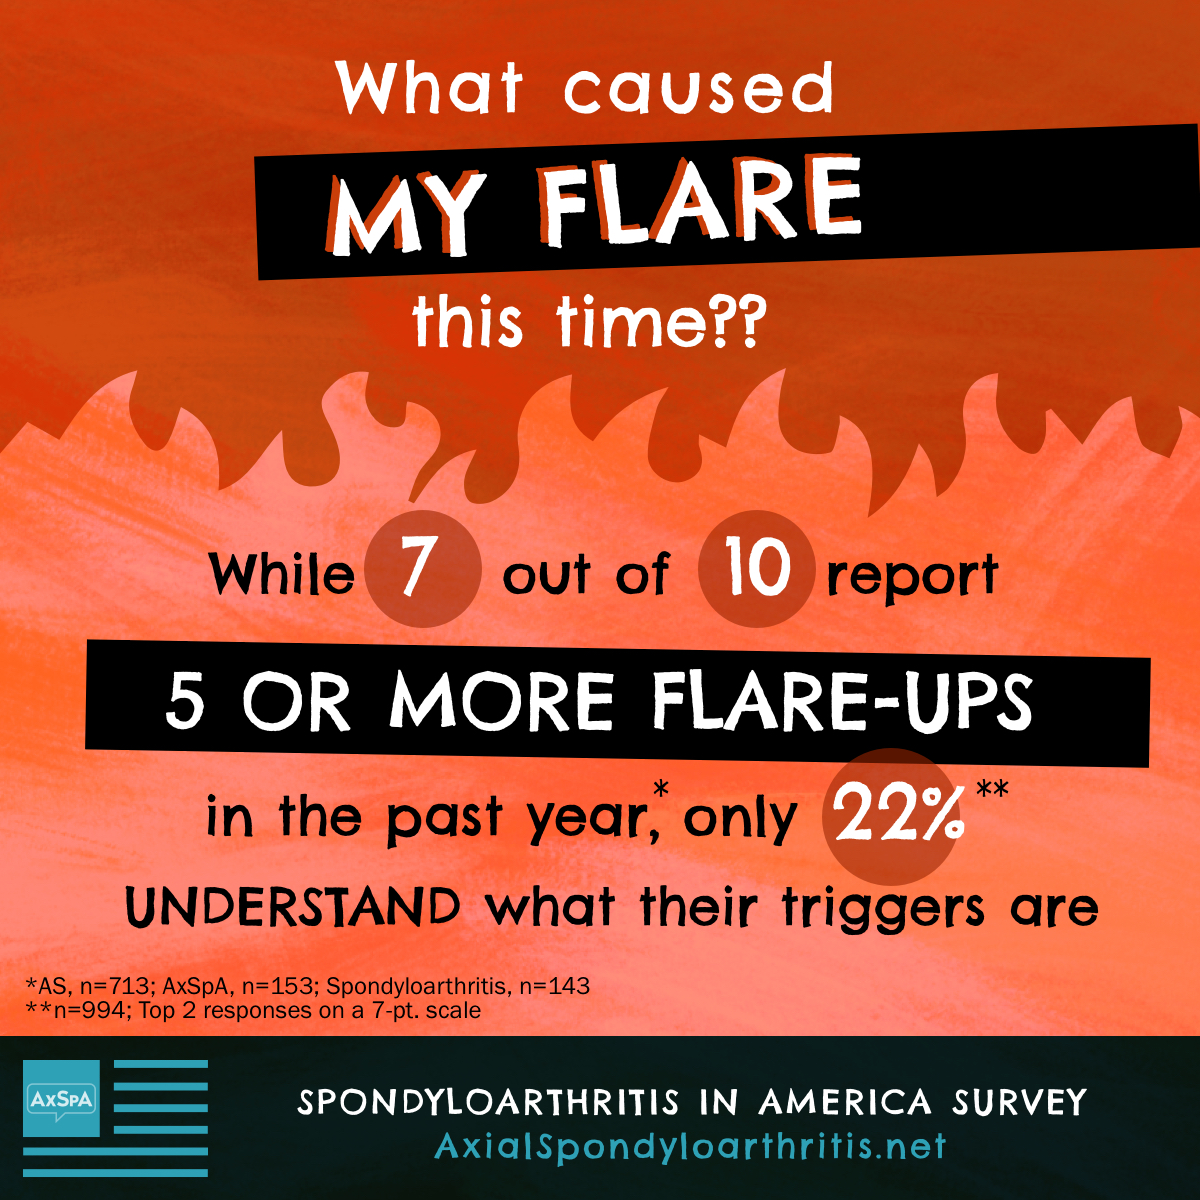 Background is flames. What caused my flare this time? While 7 out of 10 reported having 5 or more flare-ups in the past year, only 22% understand what their triggers are (n=994)